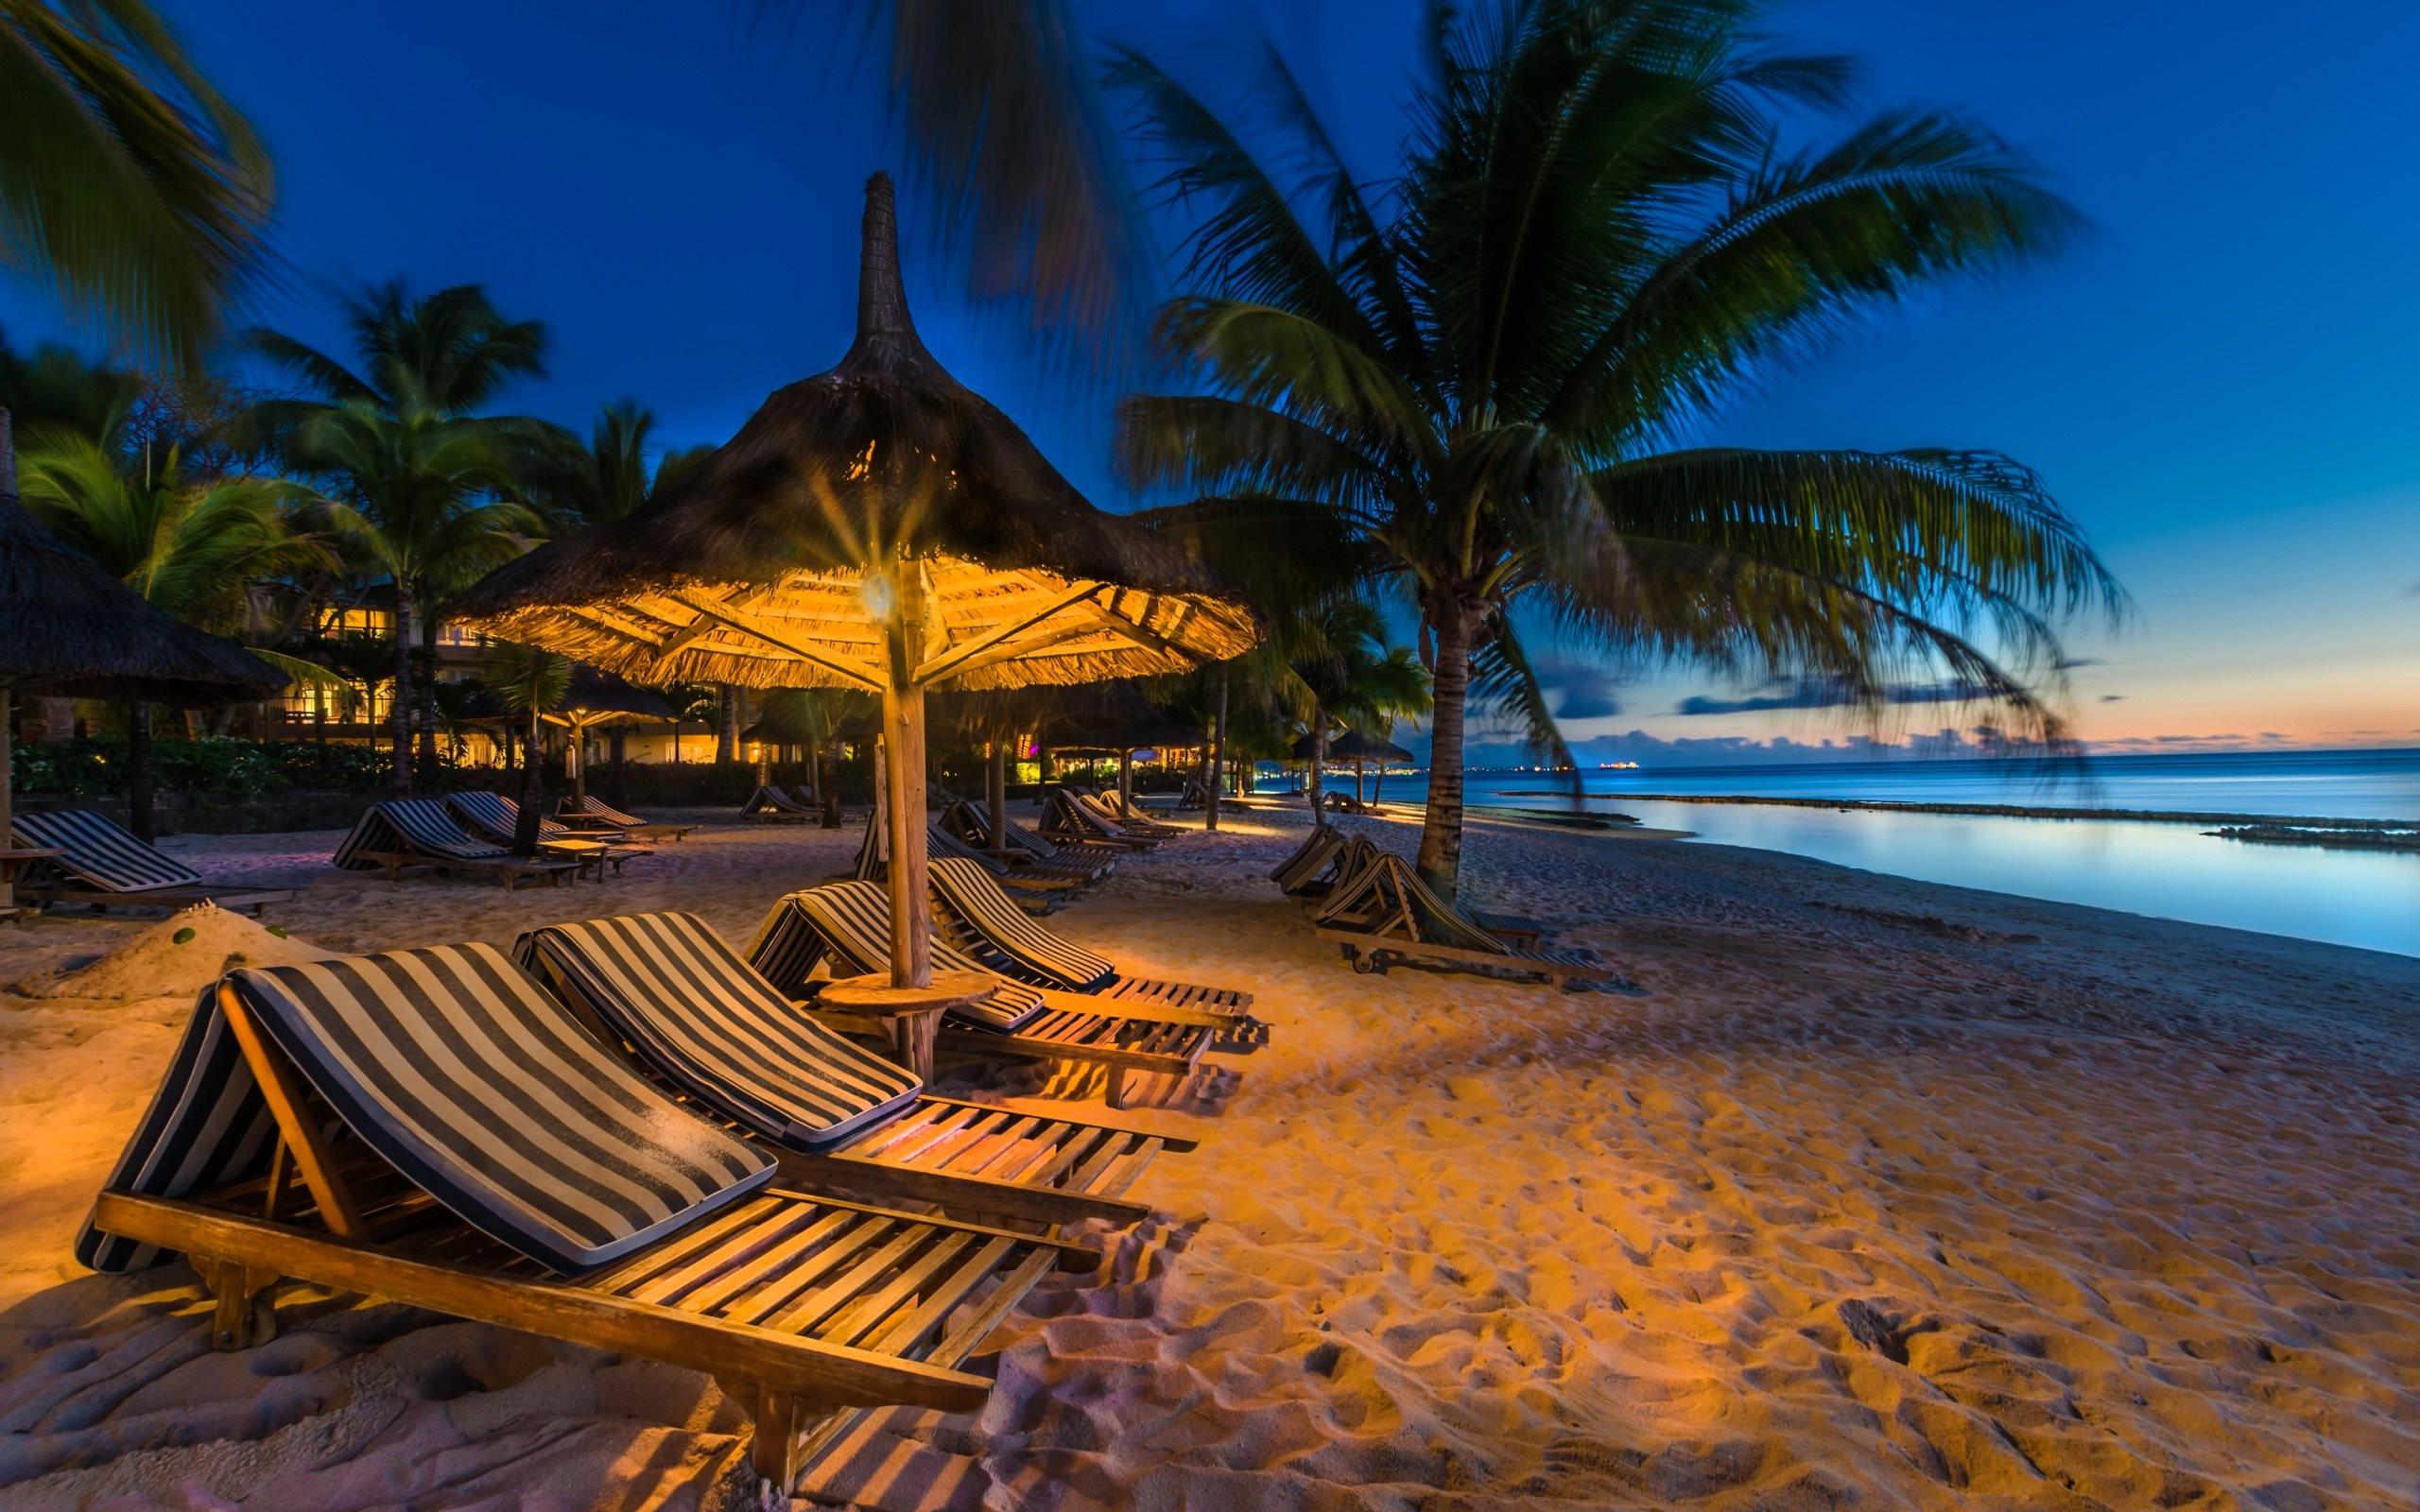 Download wallpaper tropical island, beach, evening, chaise lounges